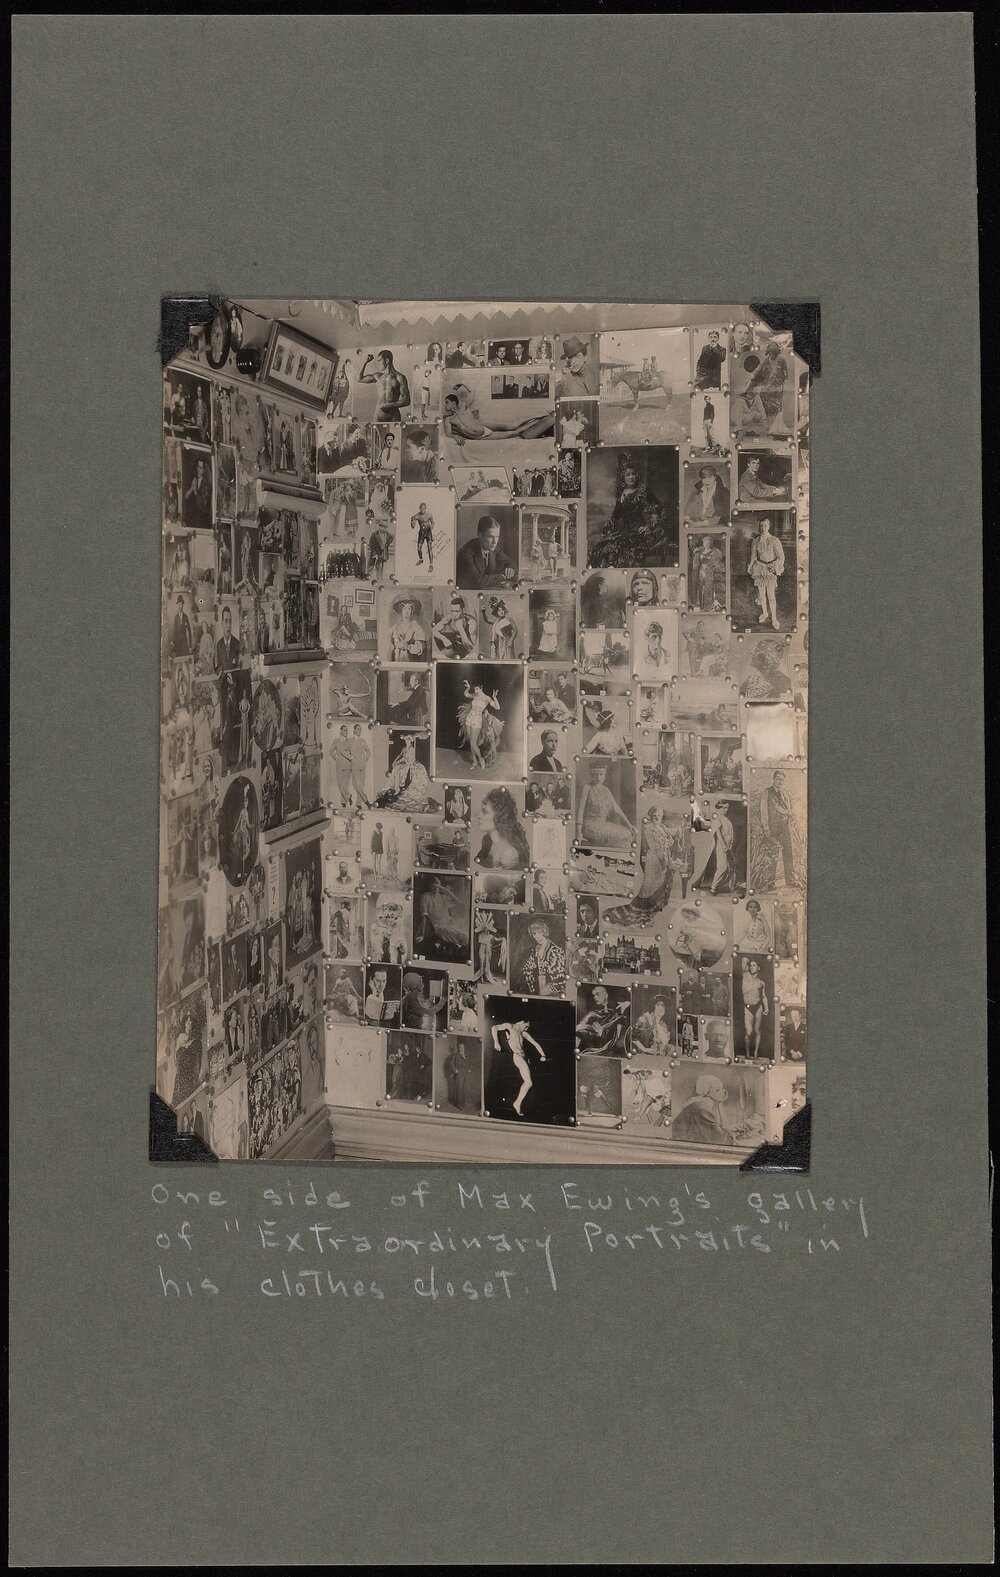 Figure 1. Max Ewing, Photograph of One Side of Max Ewing’s ‘Gallery of Extraordinary Portraits” in His Clothes Closet, 1928 or 1929. Courtesy: Beinecke Rare Book and Manuscript Library, Yale University, by permission of Wallace Ewing.